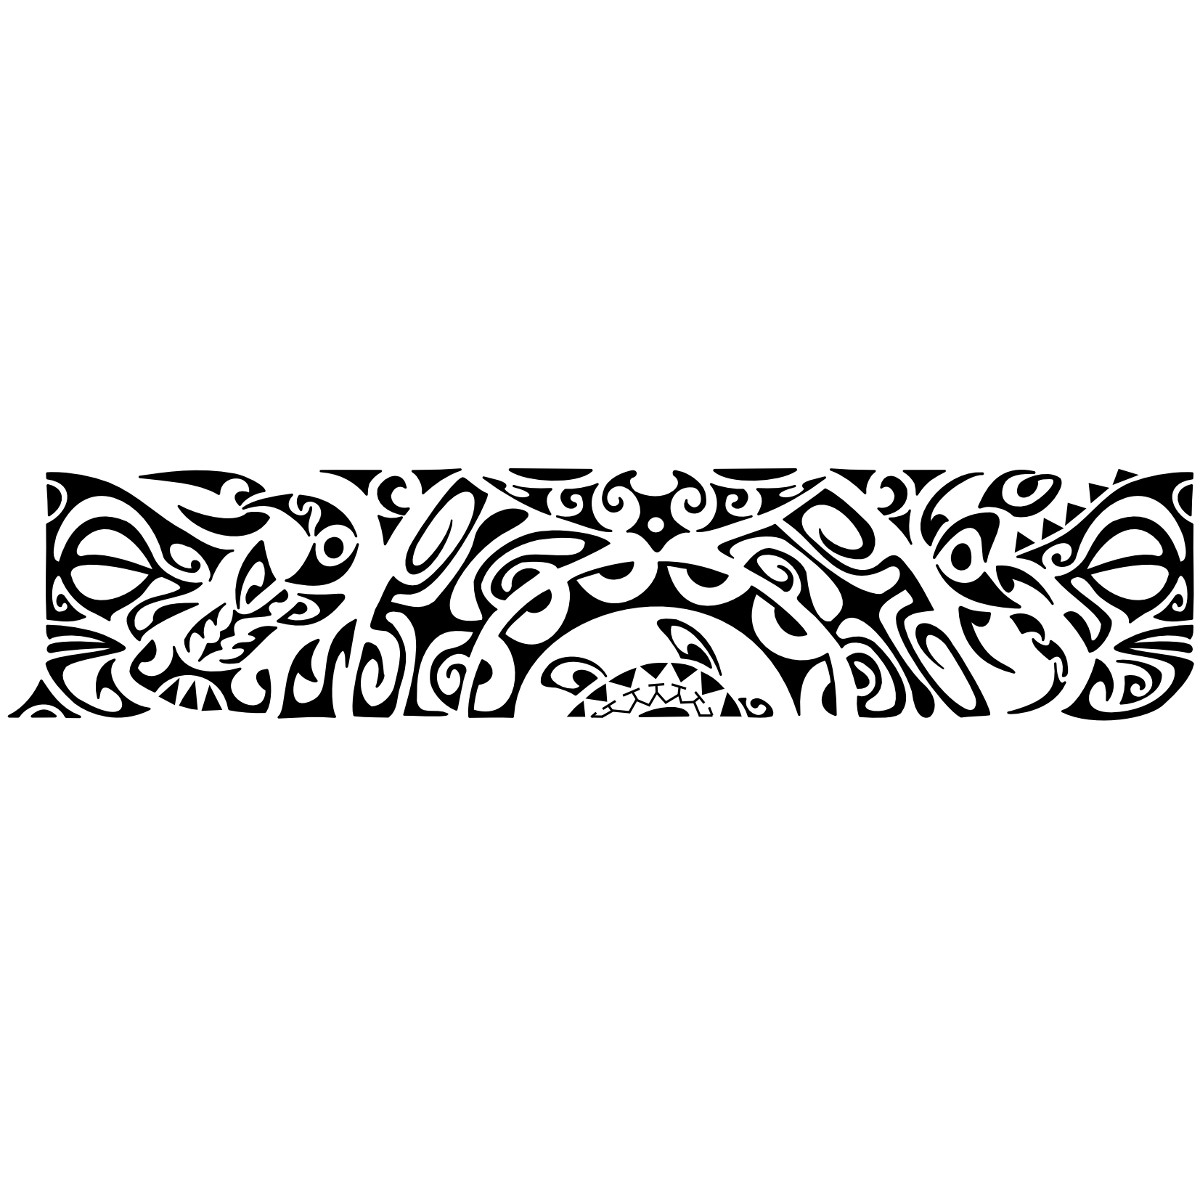 Outline Armband Tattoo Design pertaining to dimensions 1200 X 1200